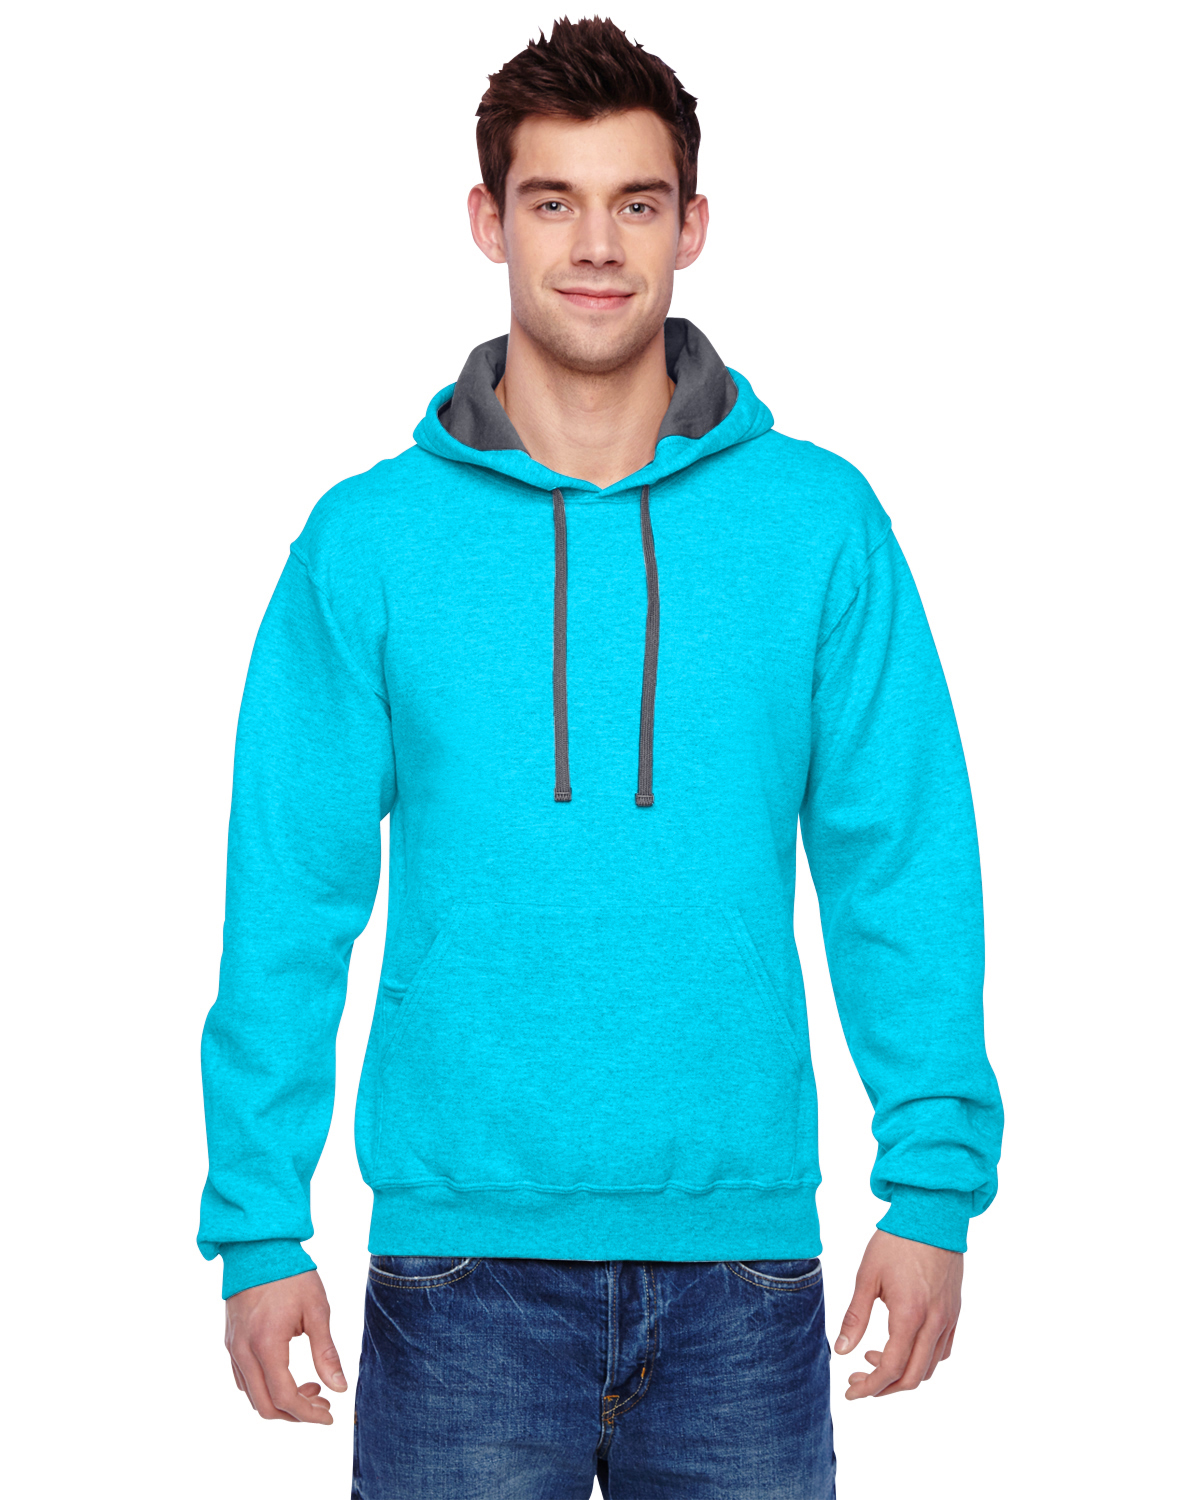 Mens Fruit of the Loom Hoodie Sweatshirts, Custom Embroidered With Your Logo!